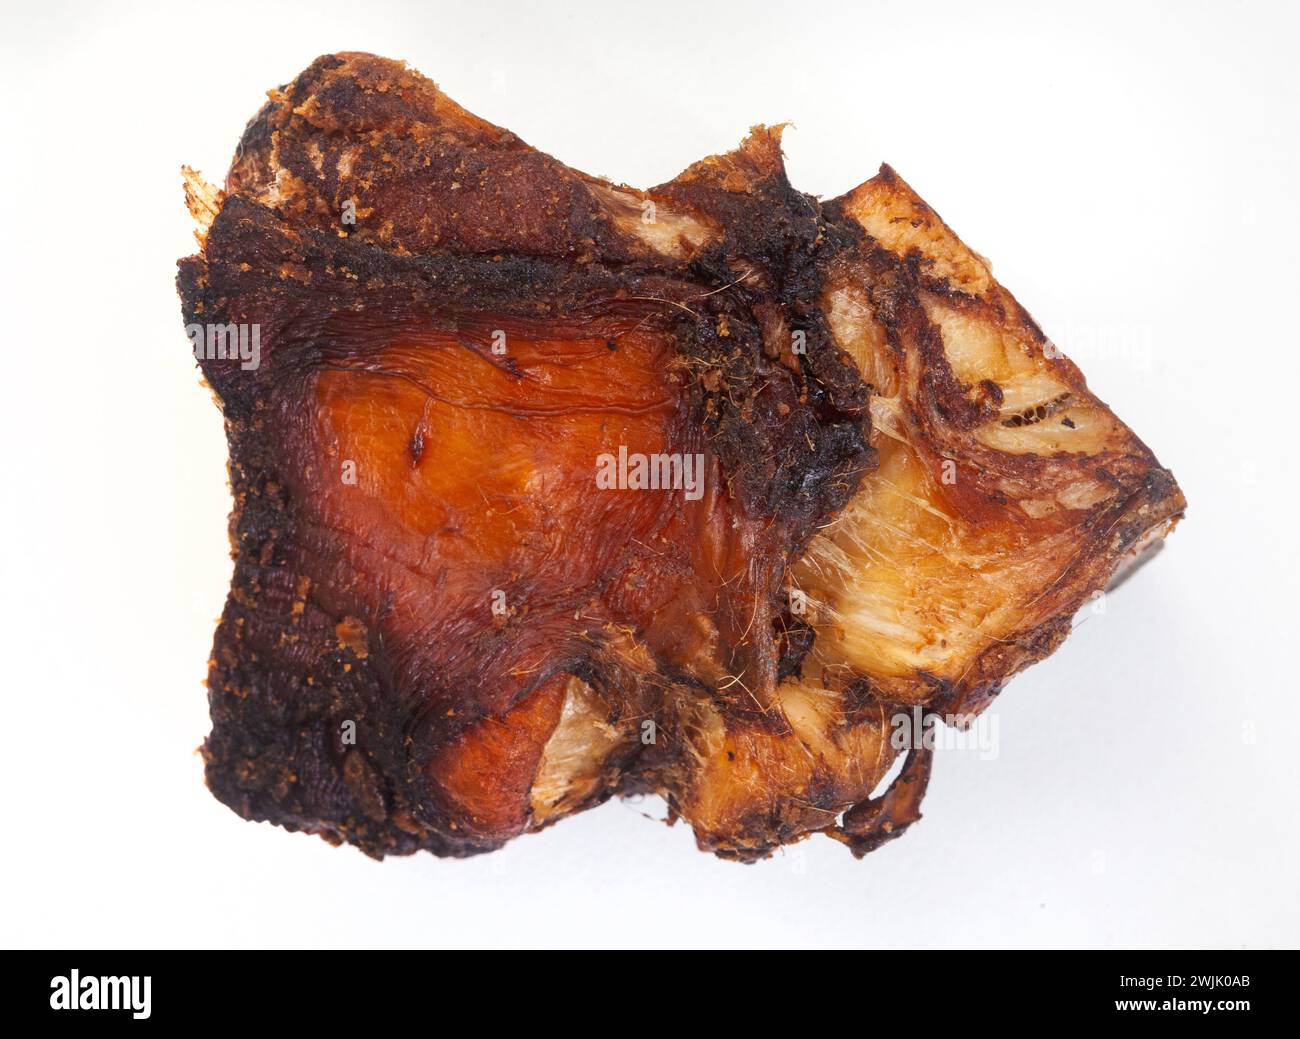 dried Beef knuckle dog bone chews and treats on white surface with copy space Stock Photo